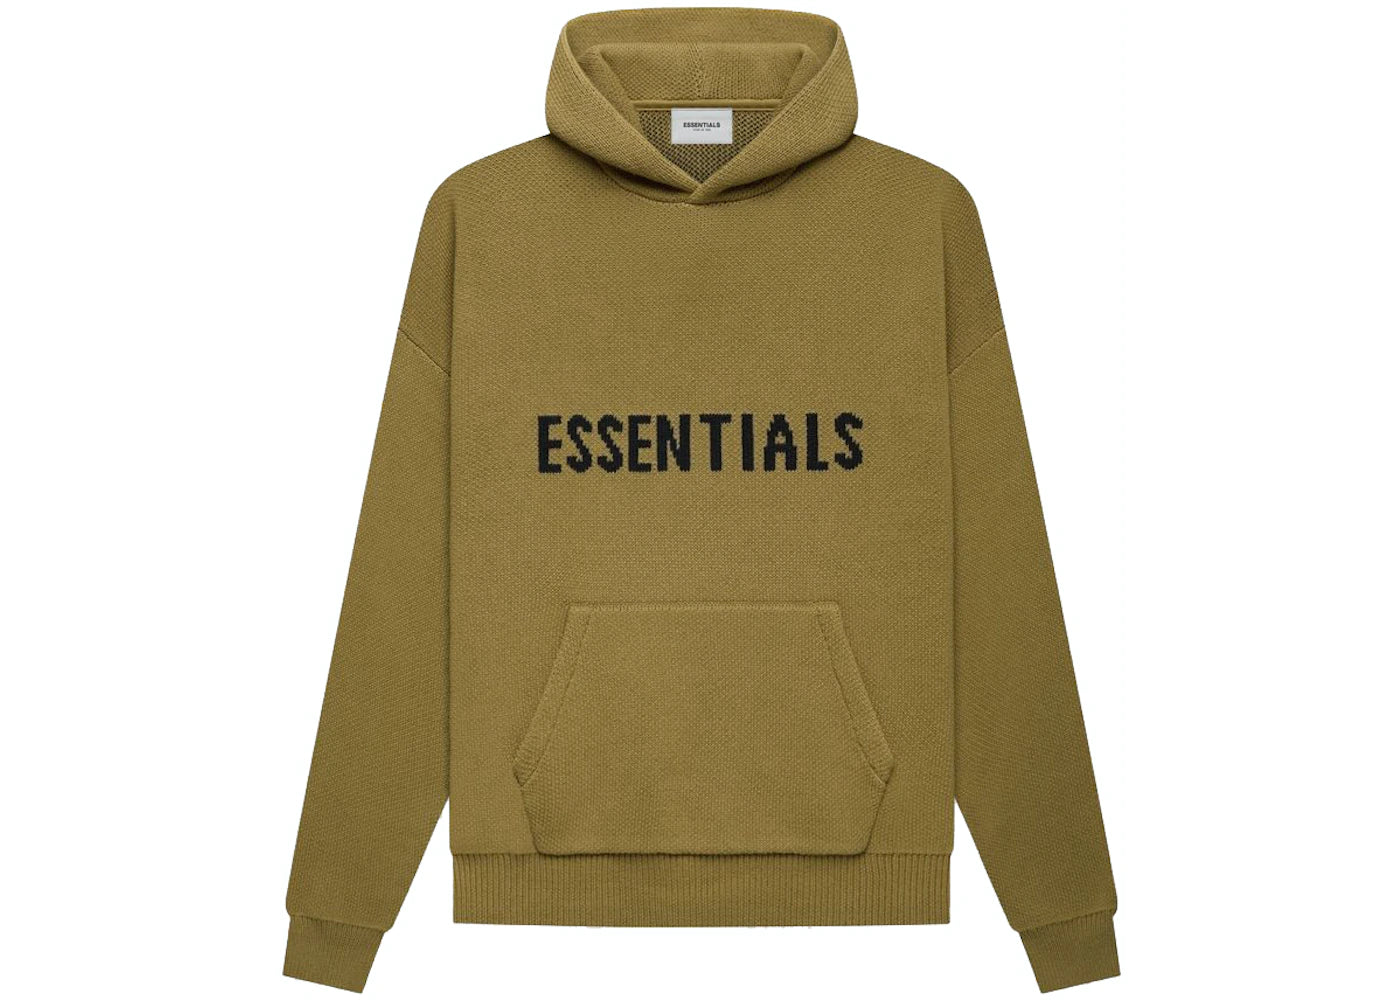 FEAR OF GOD ESSENTIALS KNIT PULLOVER HOODIE AMBER